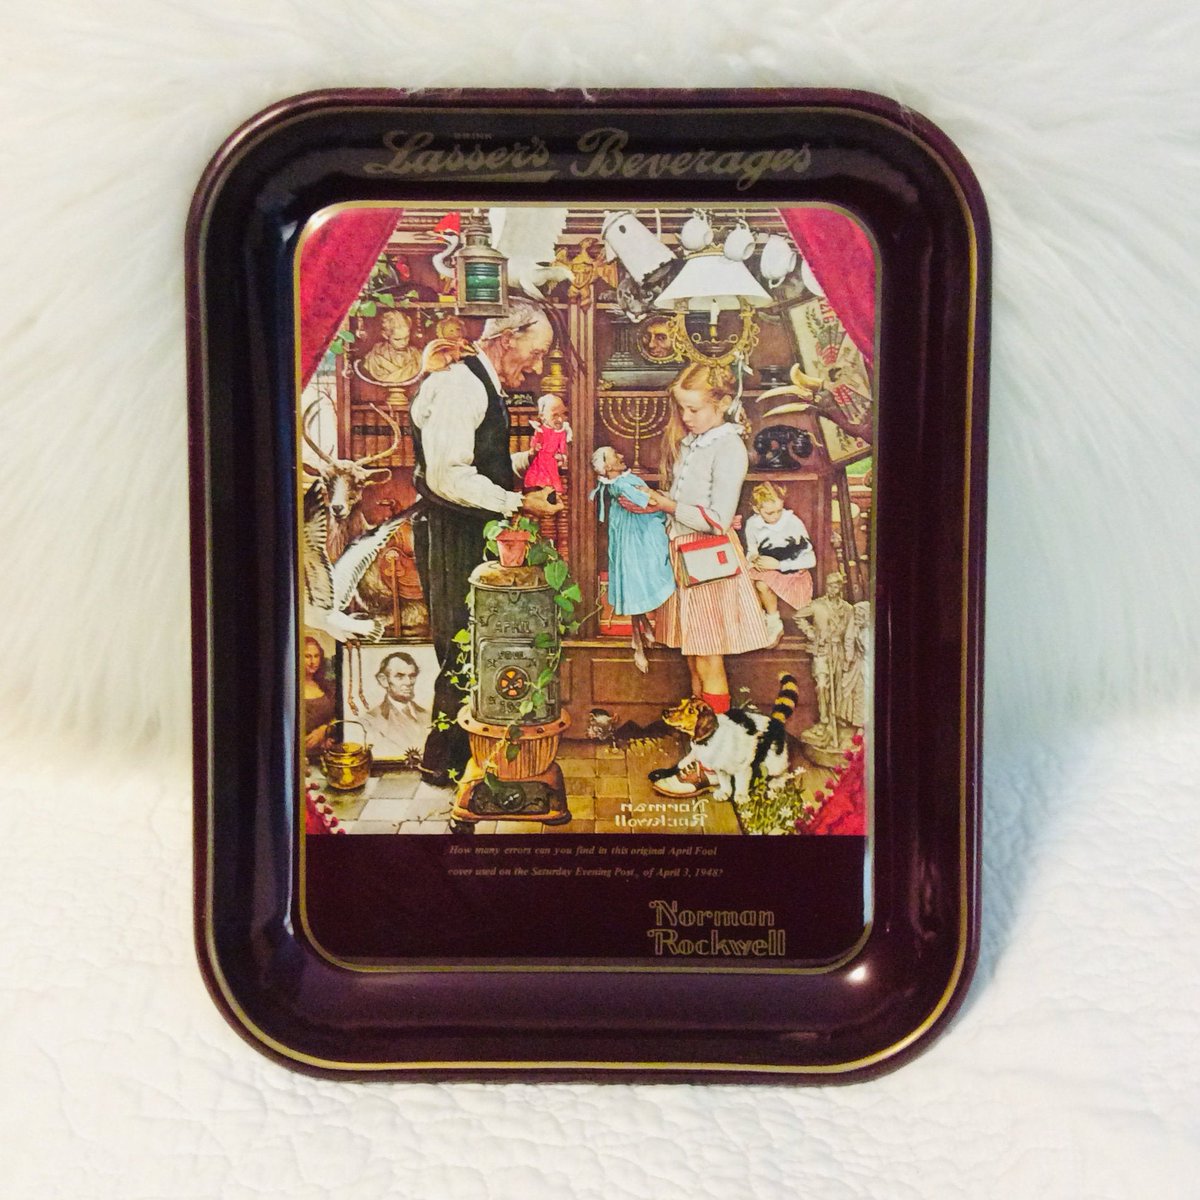 Excited to share the latest addition to my #etsy shop: Vintage Norman Rockwell Tin Tray Metal for Lassers Beverages Large April Fools Day Mid Century Funny etsy.me/3bOzxky #brown #red #metal #vintage #norman #rockwell #tin #midcentury #tray